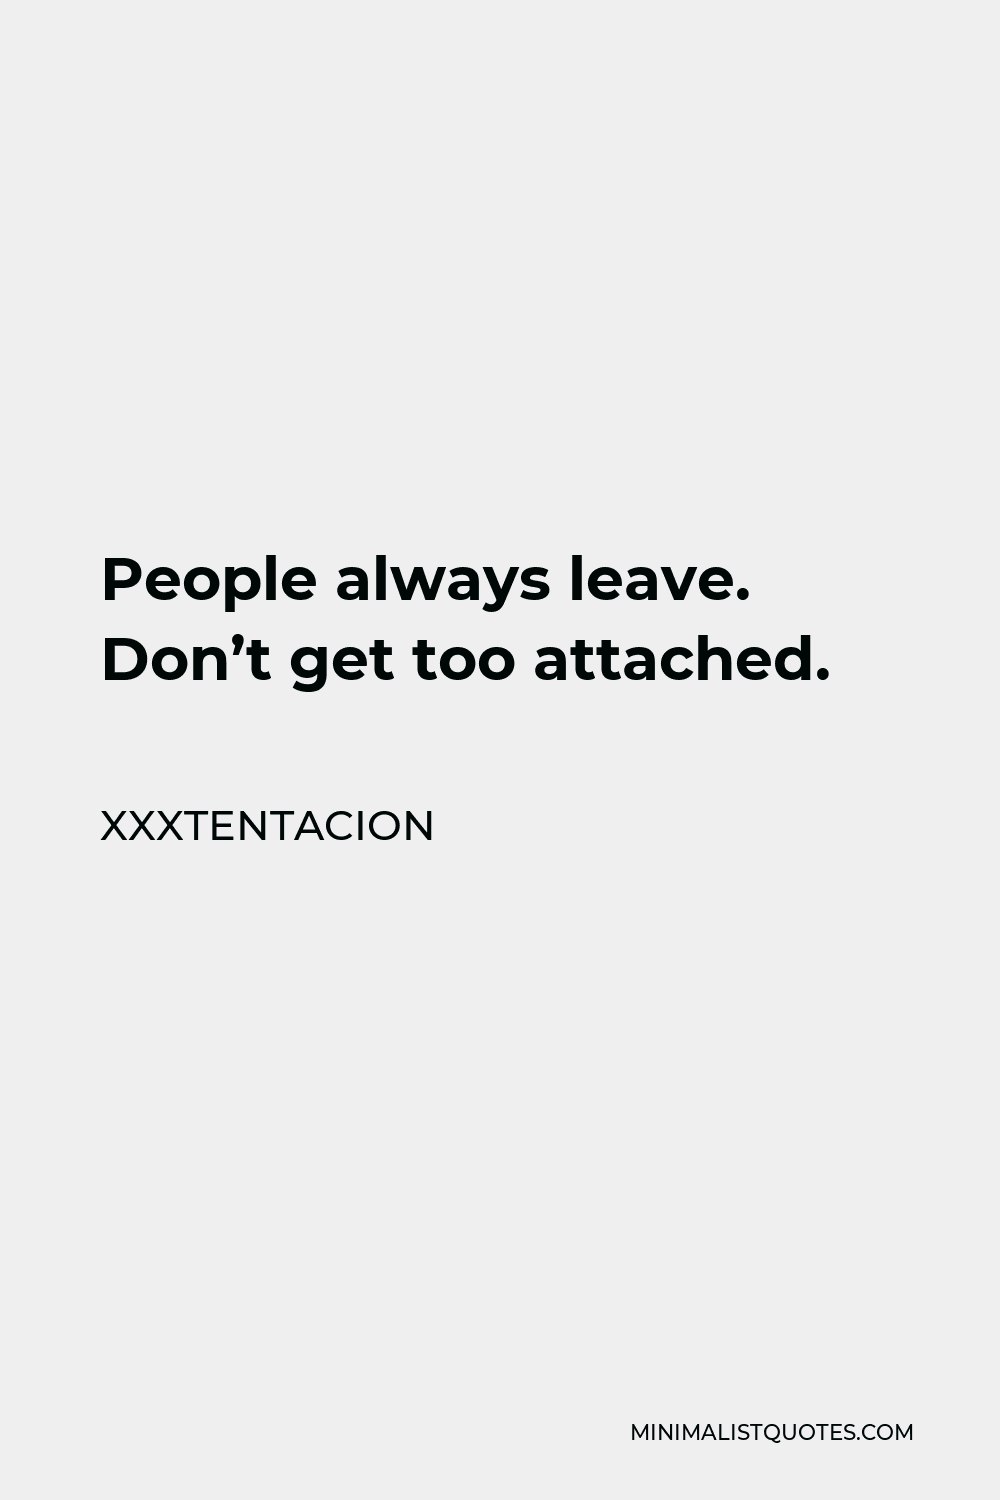 Xxxtentacion Quote - People always leave. Don’t get too attached.